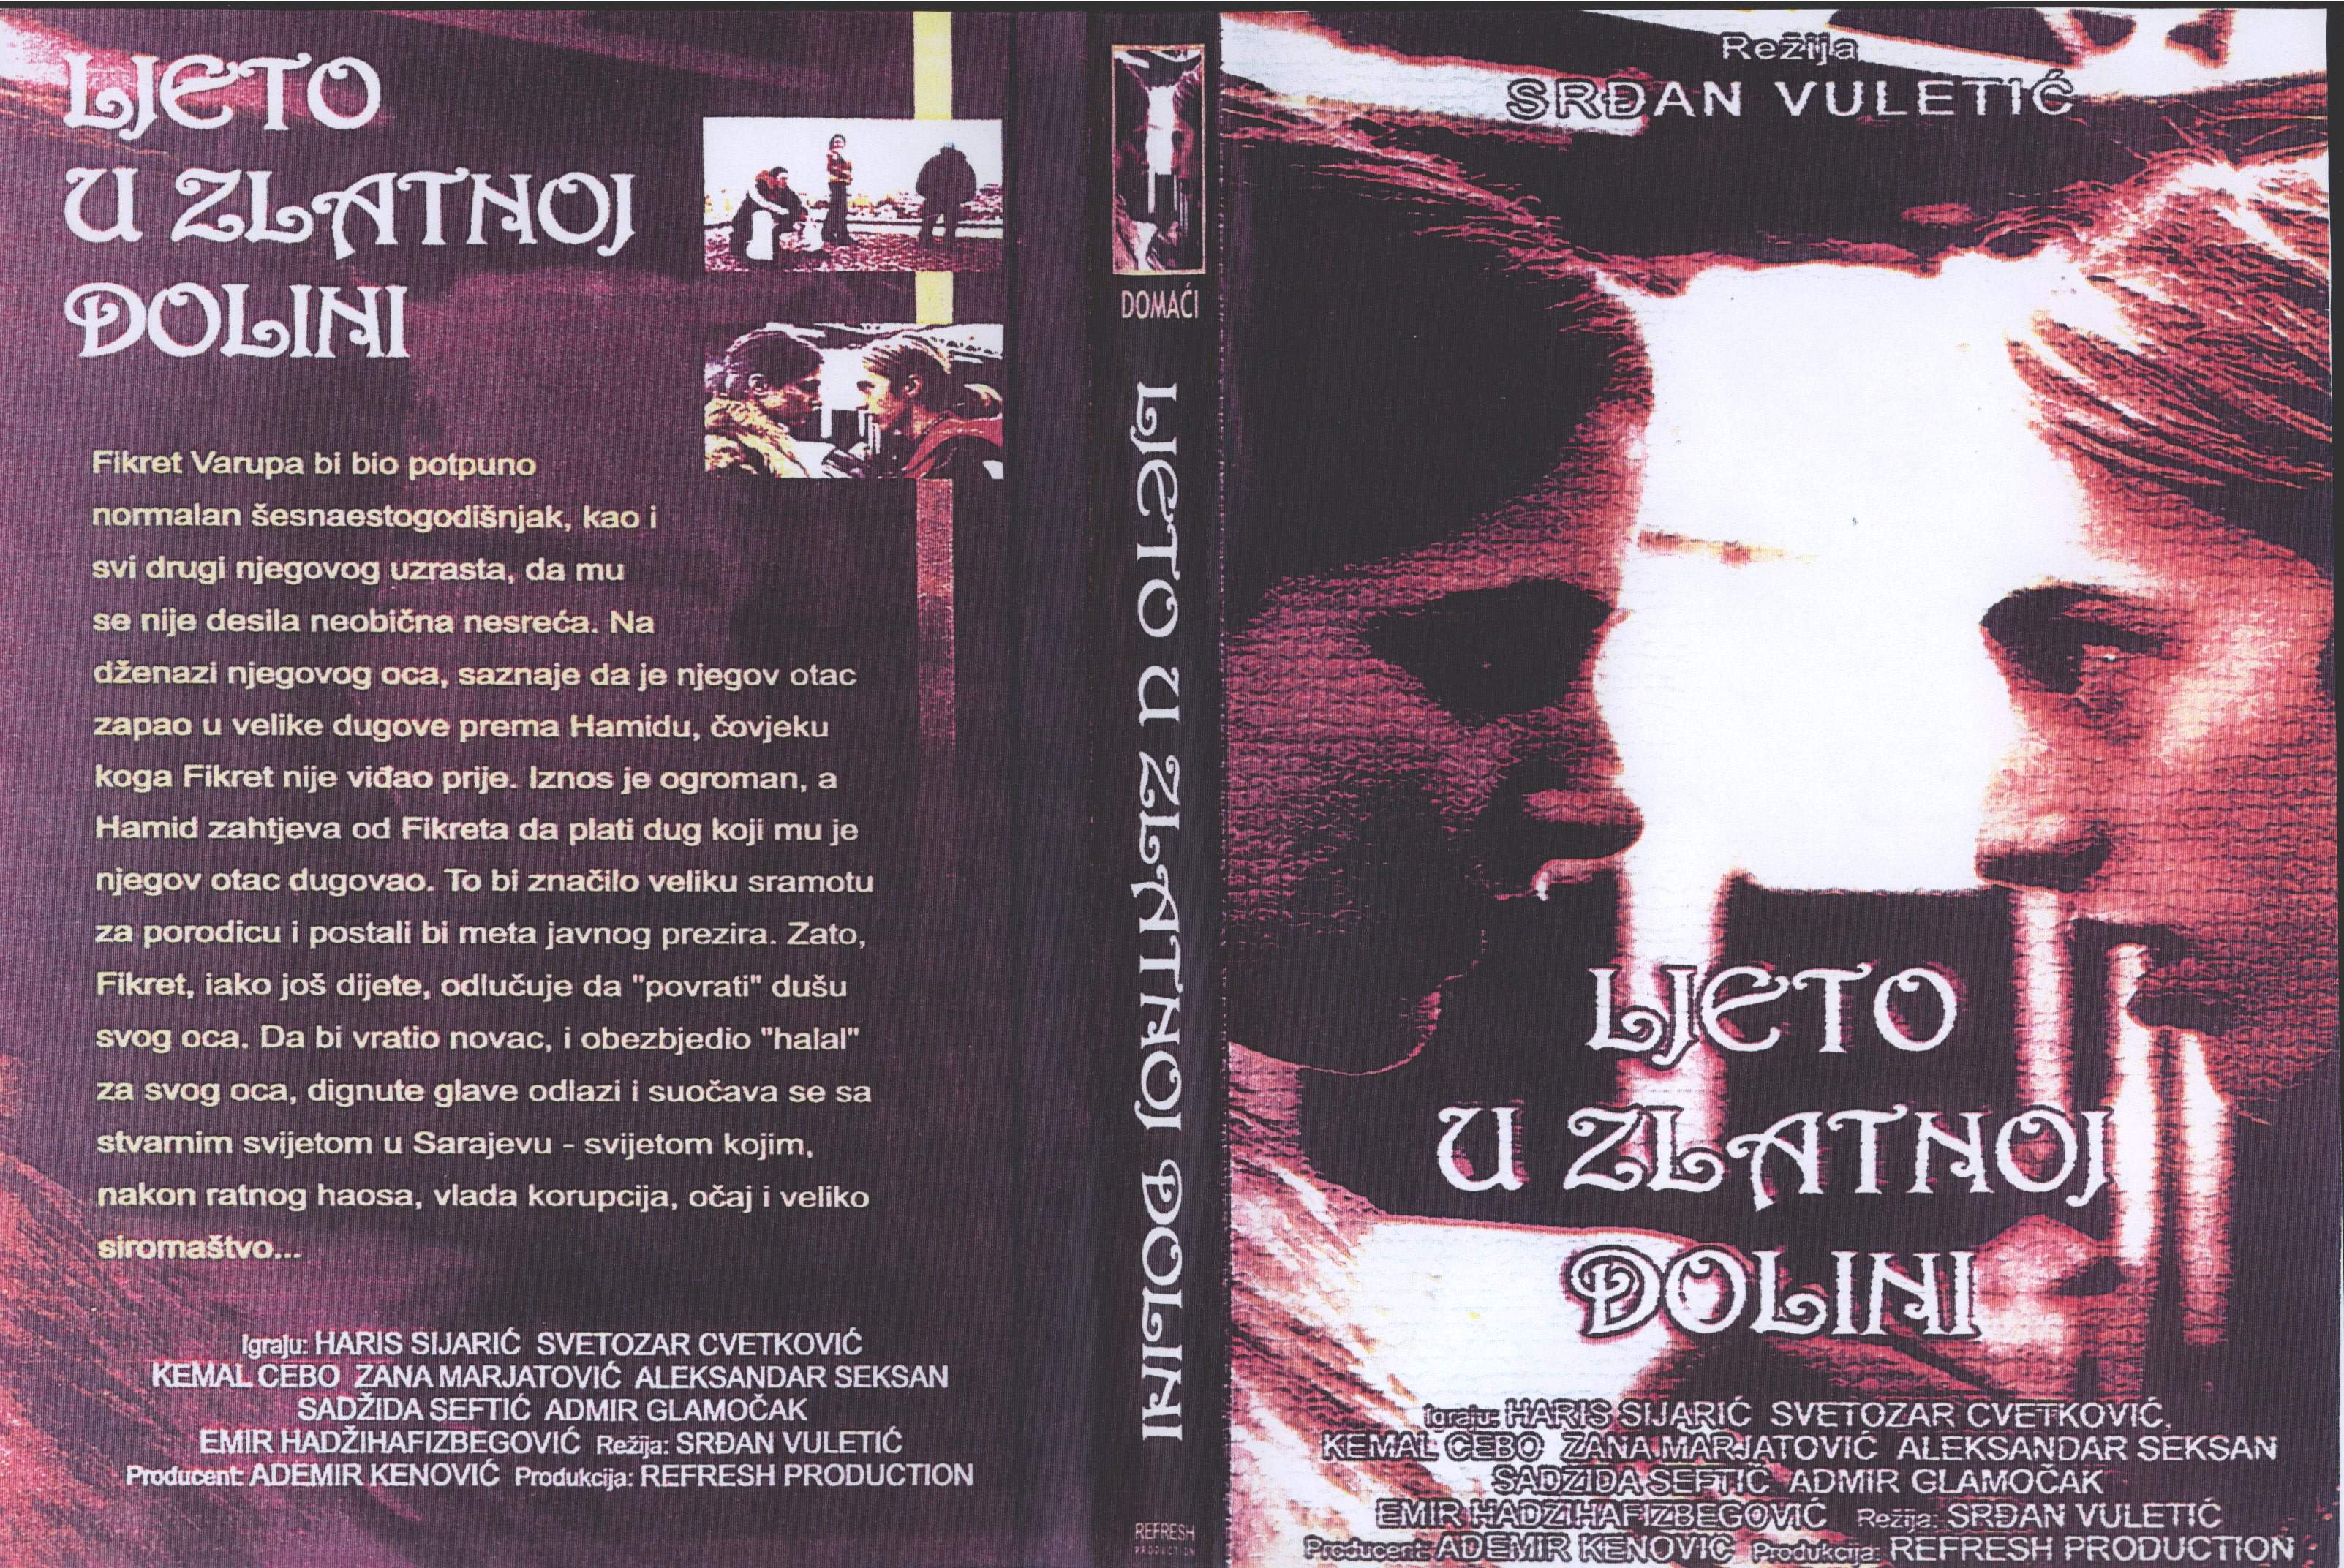 Click to view full size image -  DVD Cover - L - DVD - LJETO U ZLATNOJ DOLINI - DVD - LJETO U ZLATNOJ DOLINI.JPG